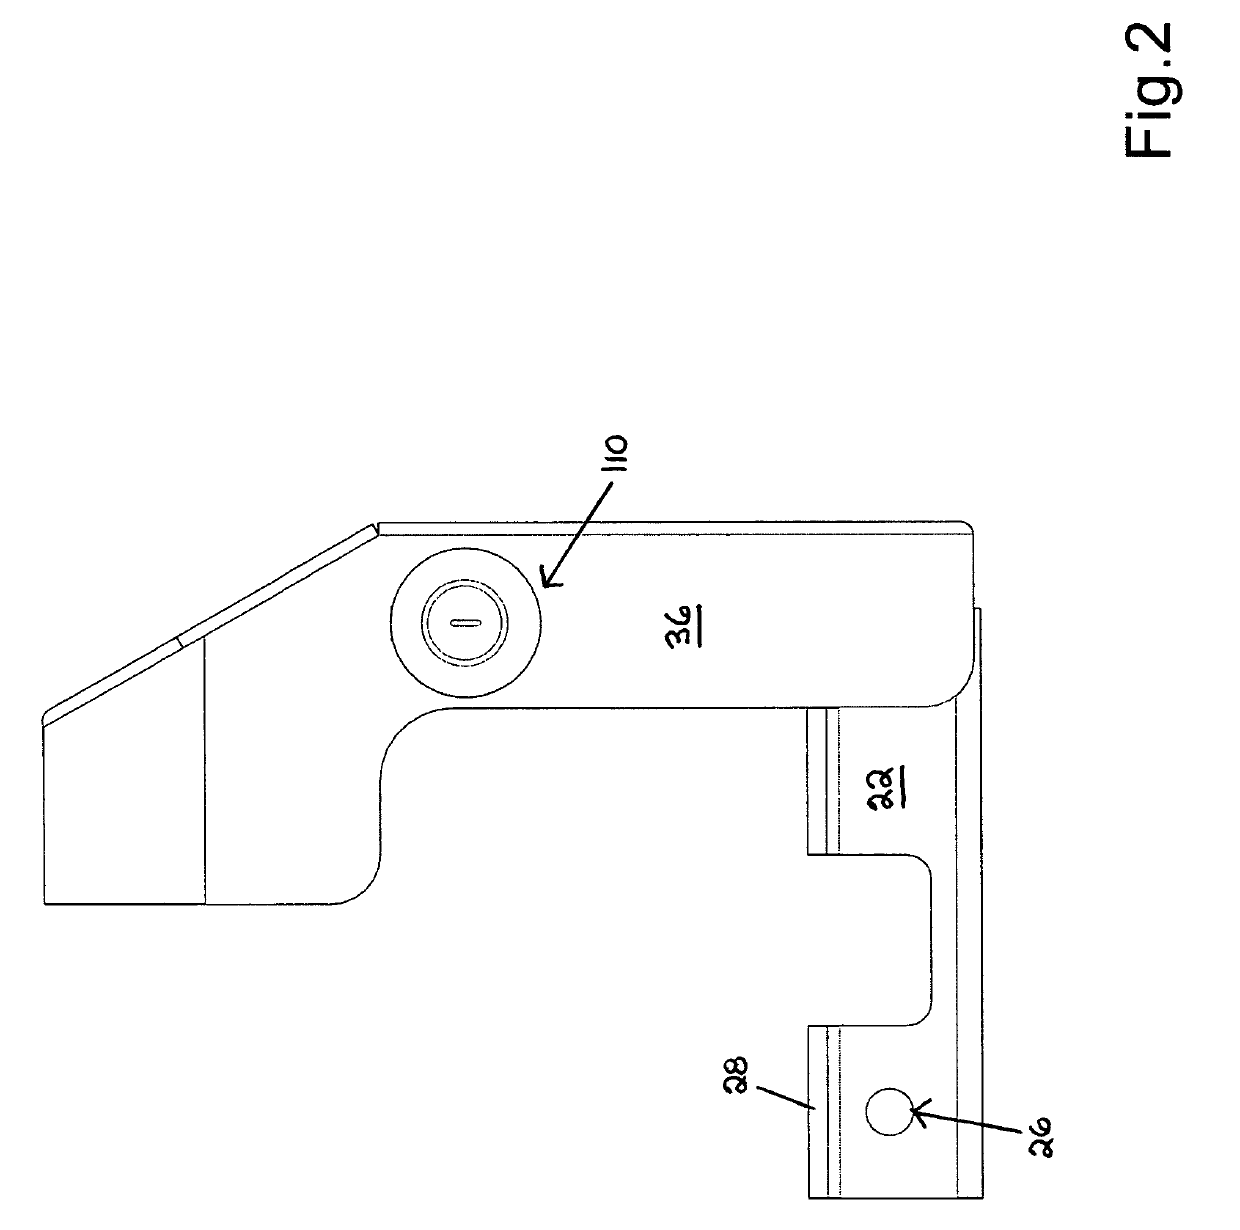 Security device for trailer hitch